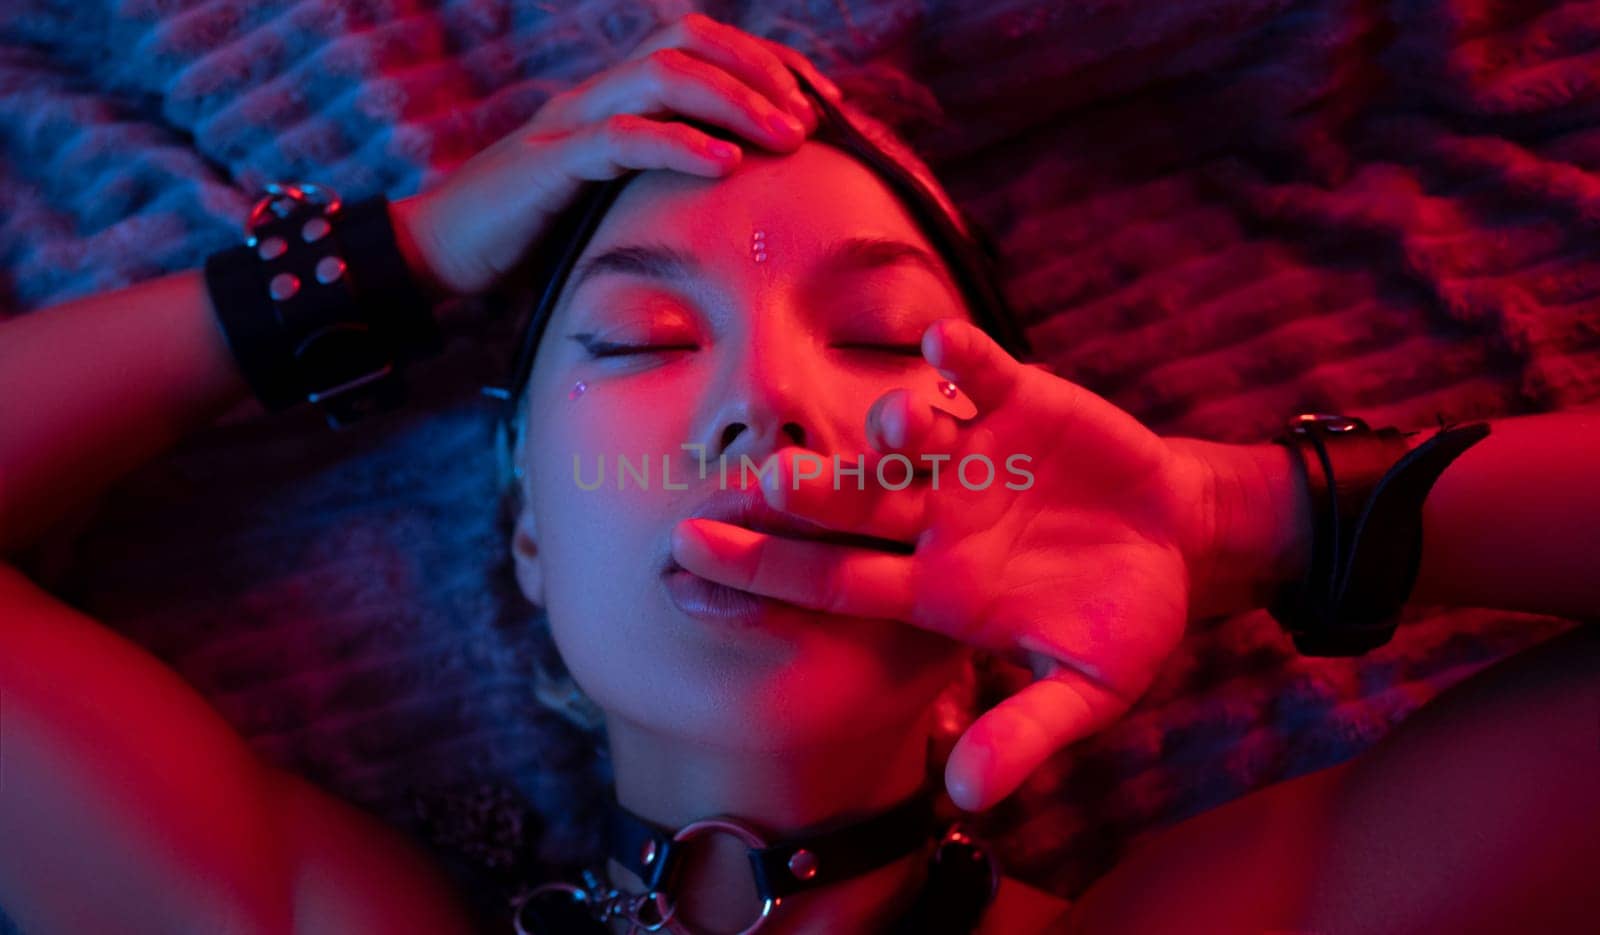 portrait of a sexy girl in a leather mask and bdsm accessories on a bed enjoying sex in orgasm with emotions on her face in neon light